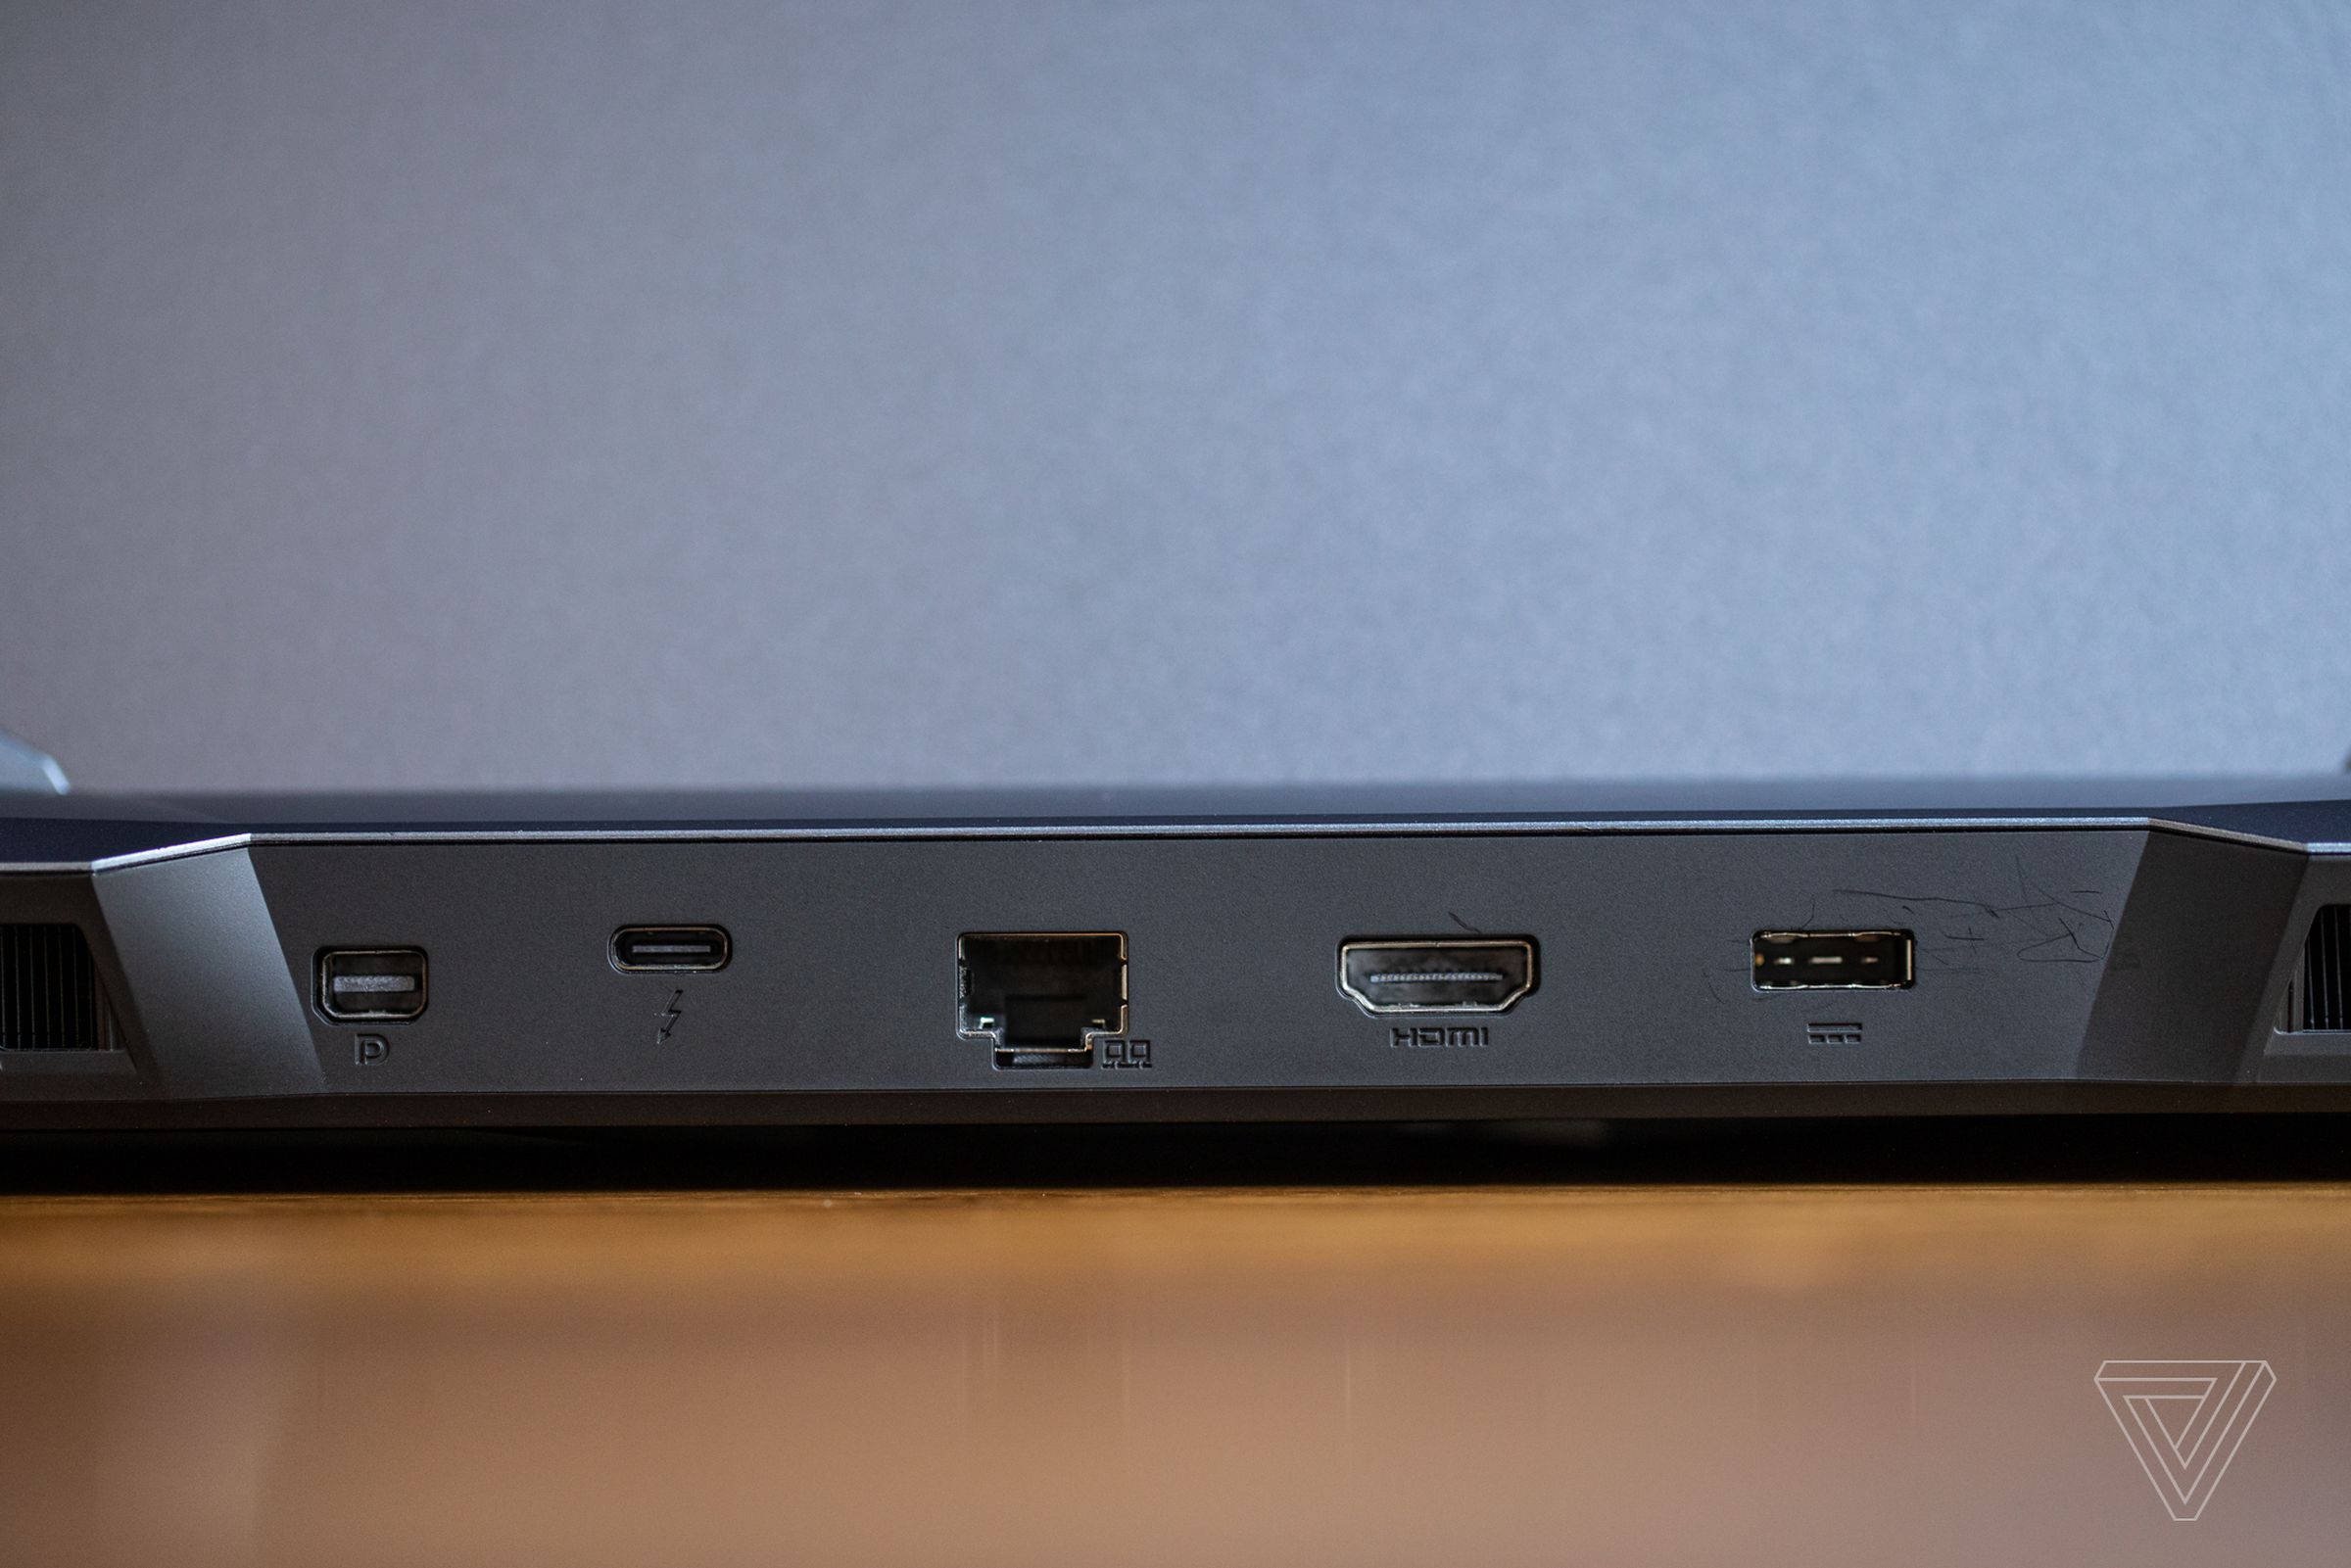 The ports in the back of the MSI GE76 Raider.